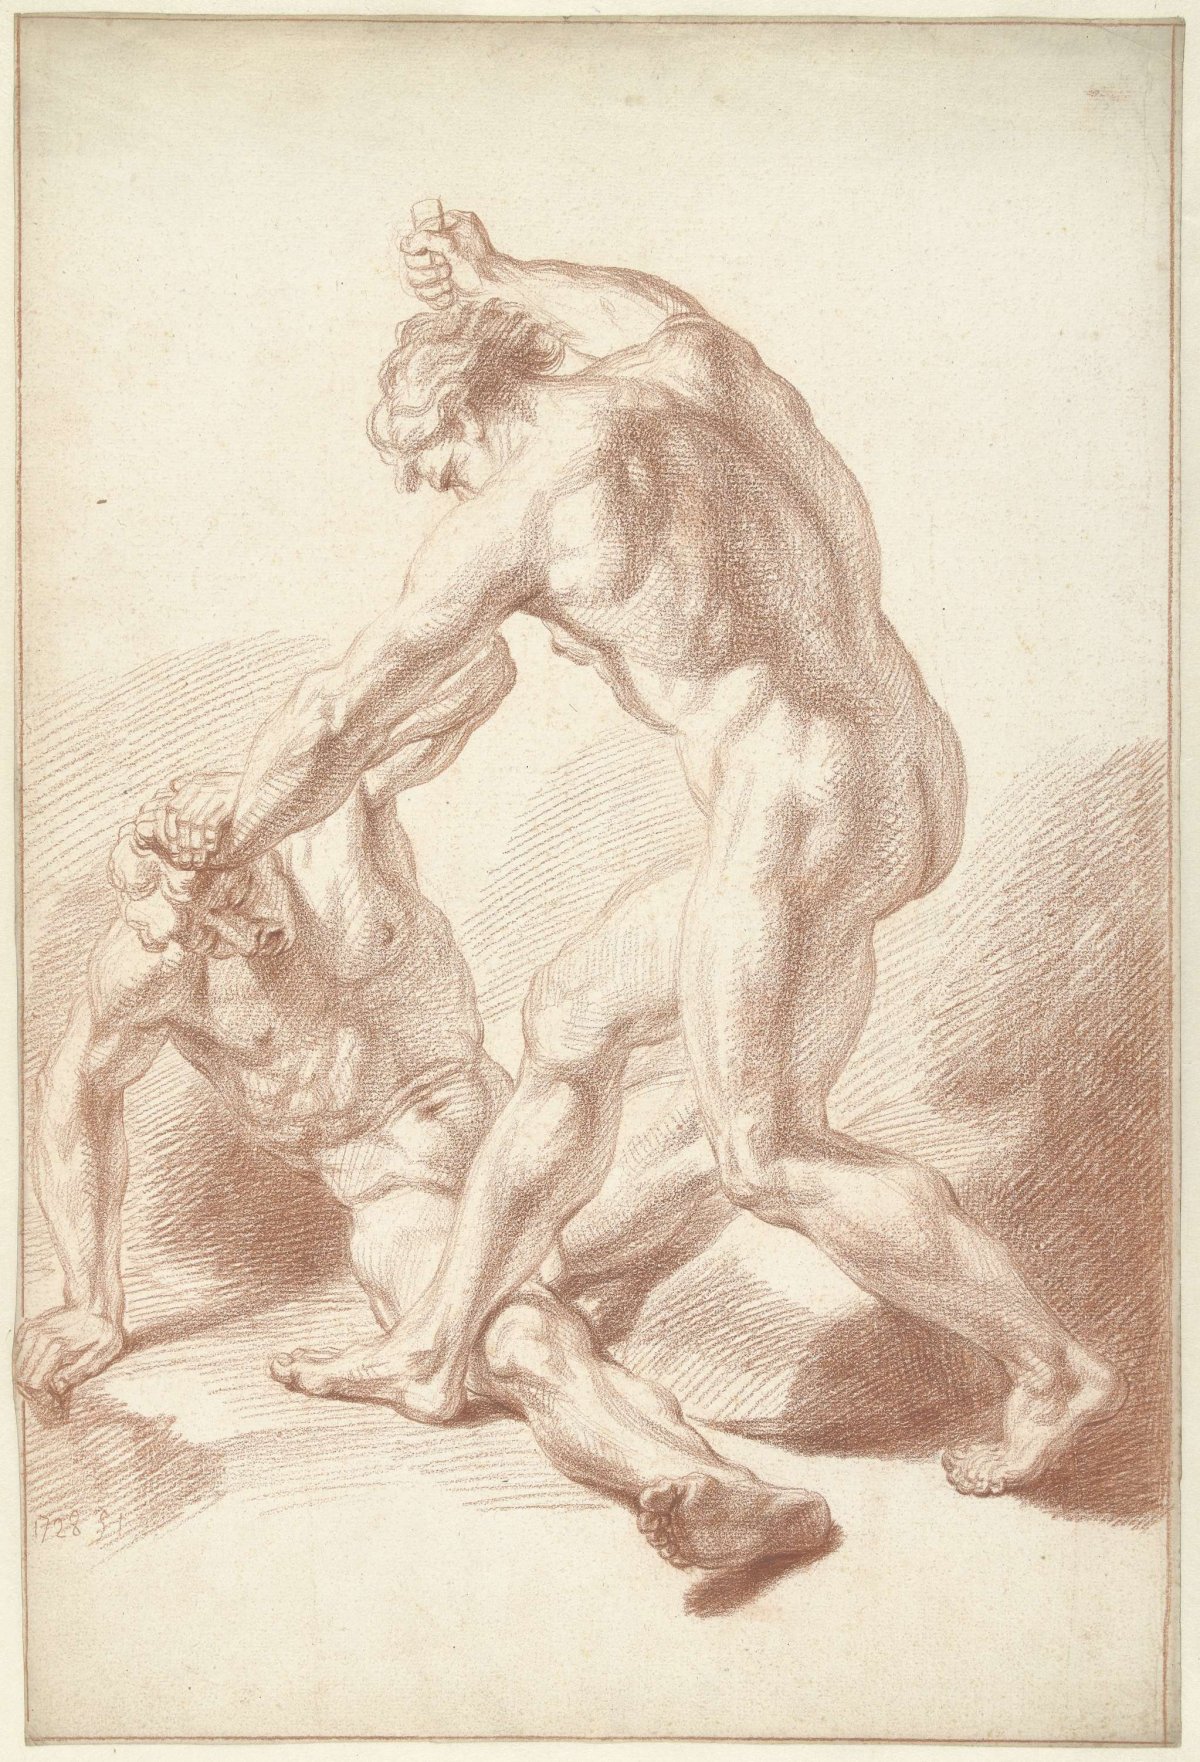 Two naked men in battle, Louis Fabritius Dubourg, 1728